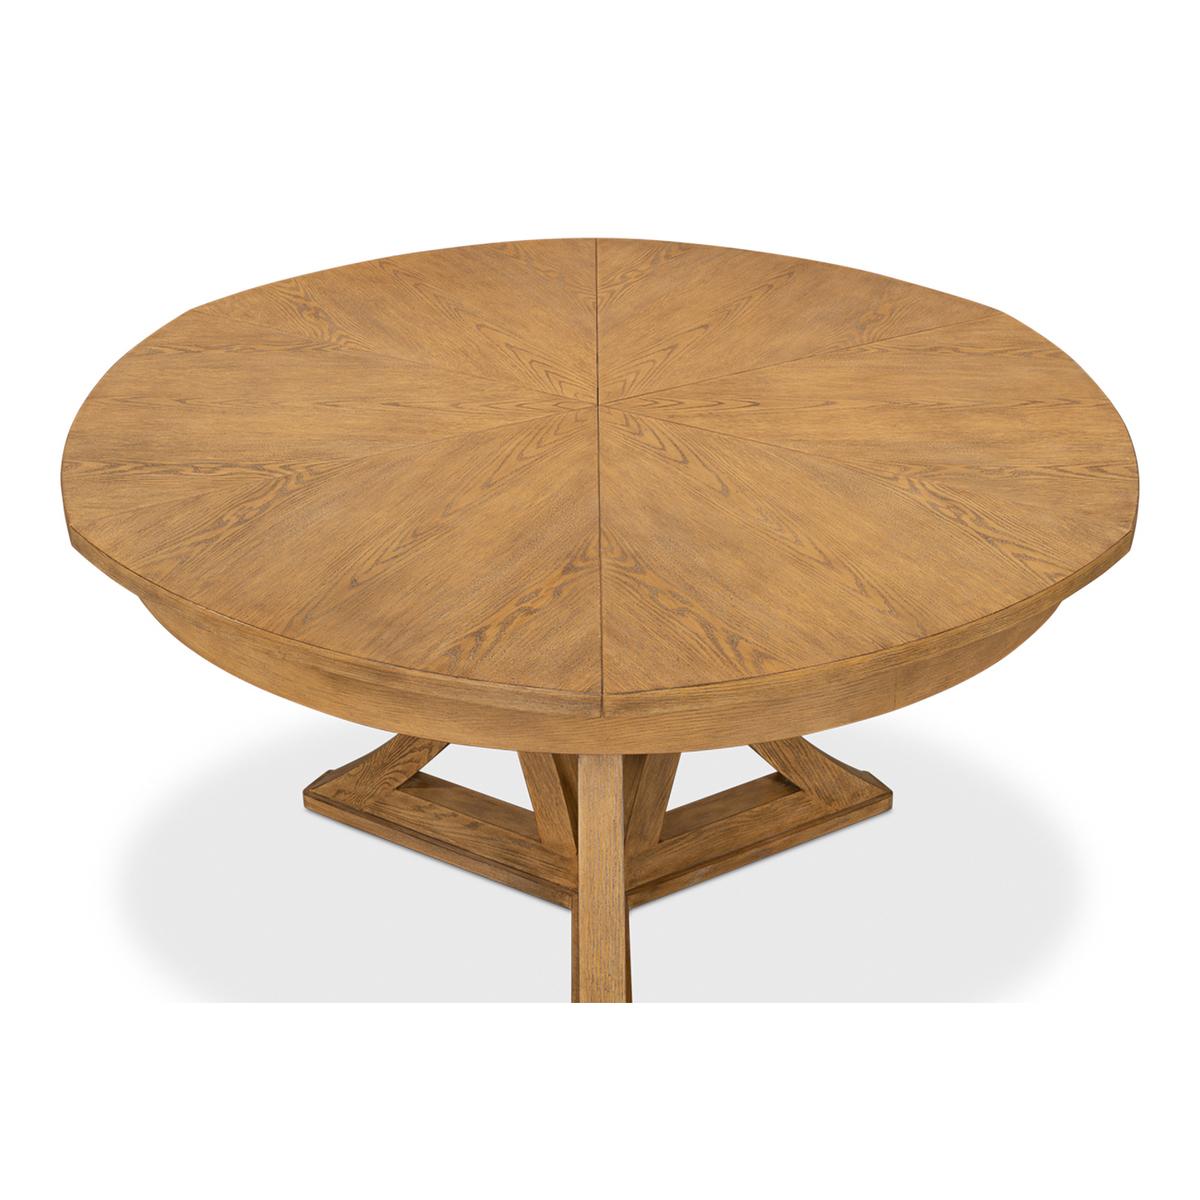 Wood Rustic Round Dining Table - Heather Grey For Sale